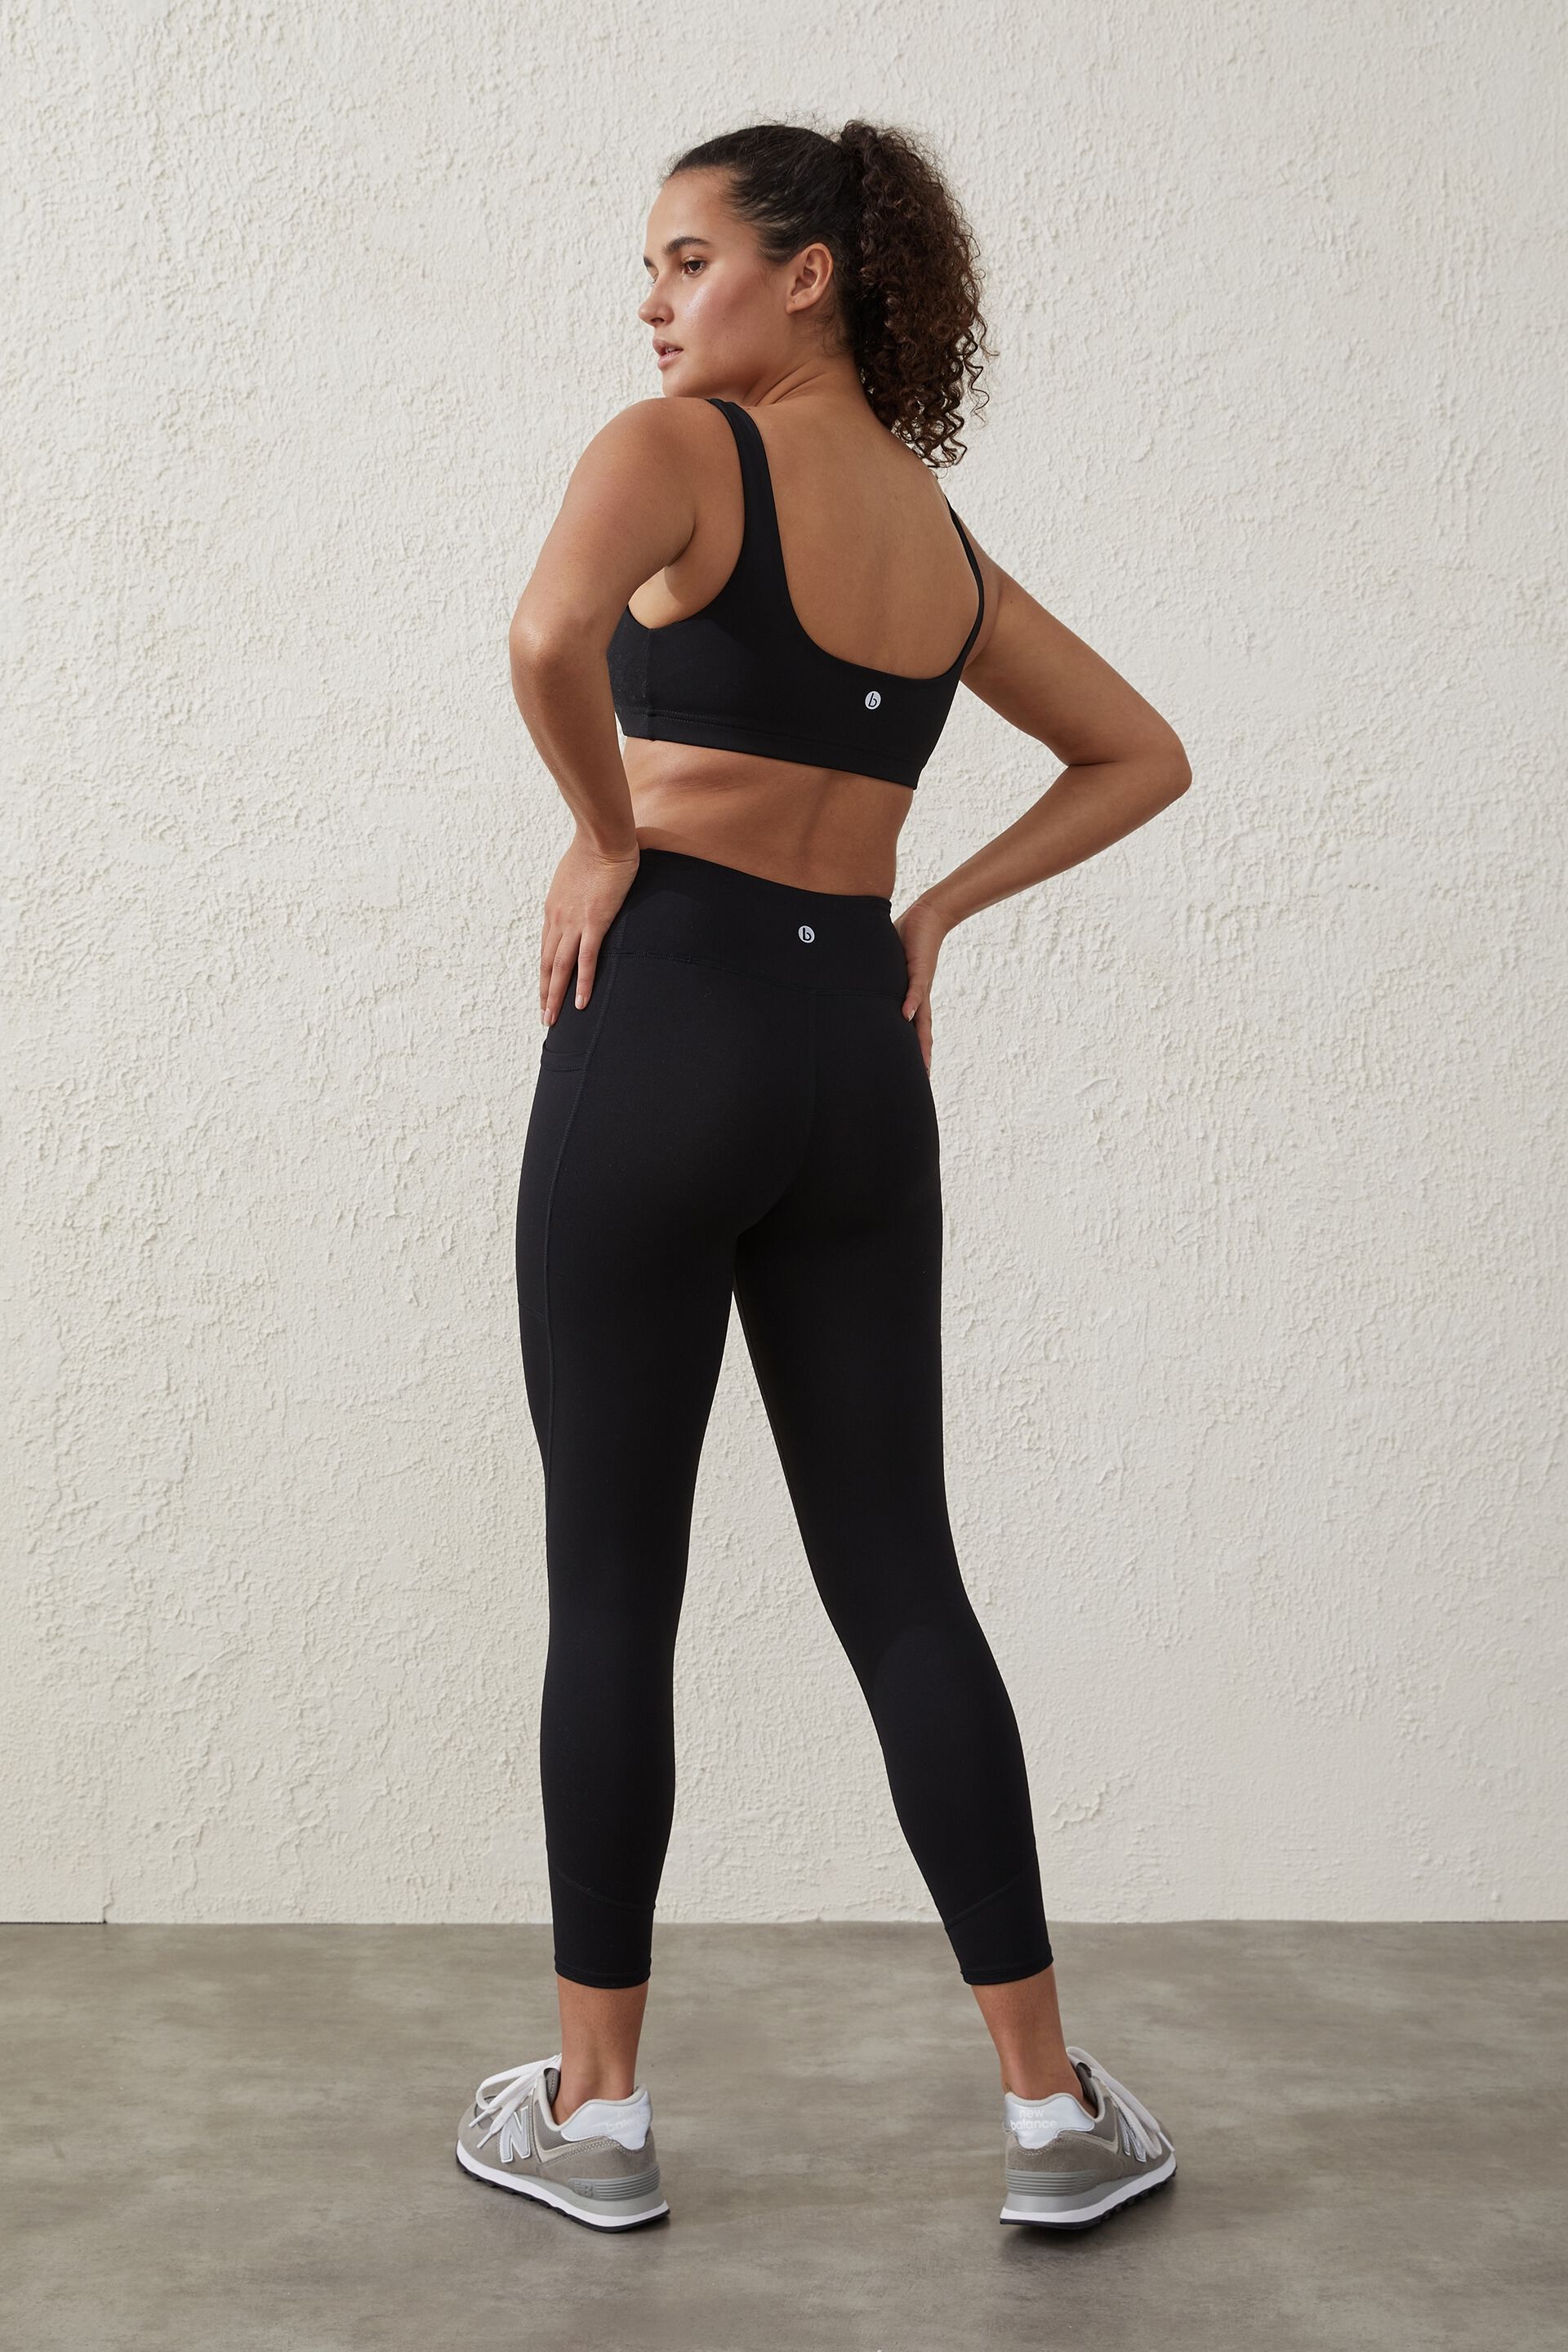 Cukoo Lingerie  Cukoo Black  Pink ActivewearYogaGymSports Track Pants  with Zipped Pocket Online  Nykaa Fashion